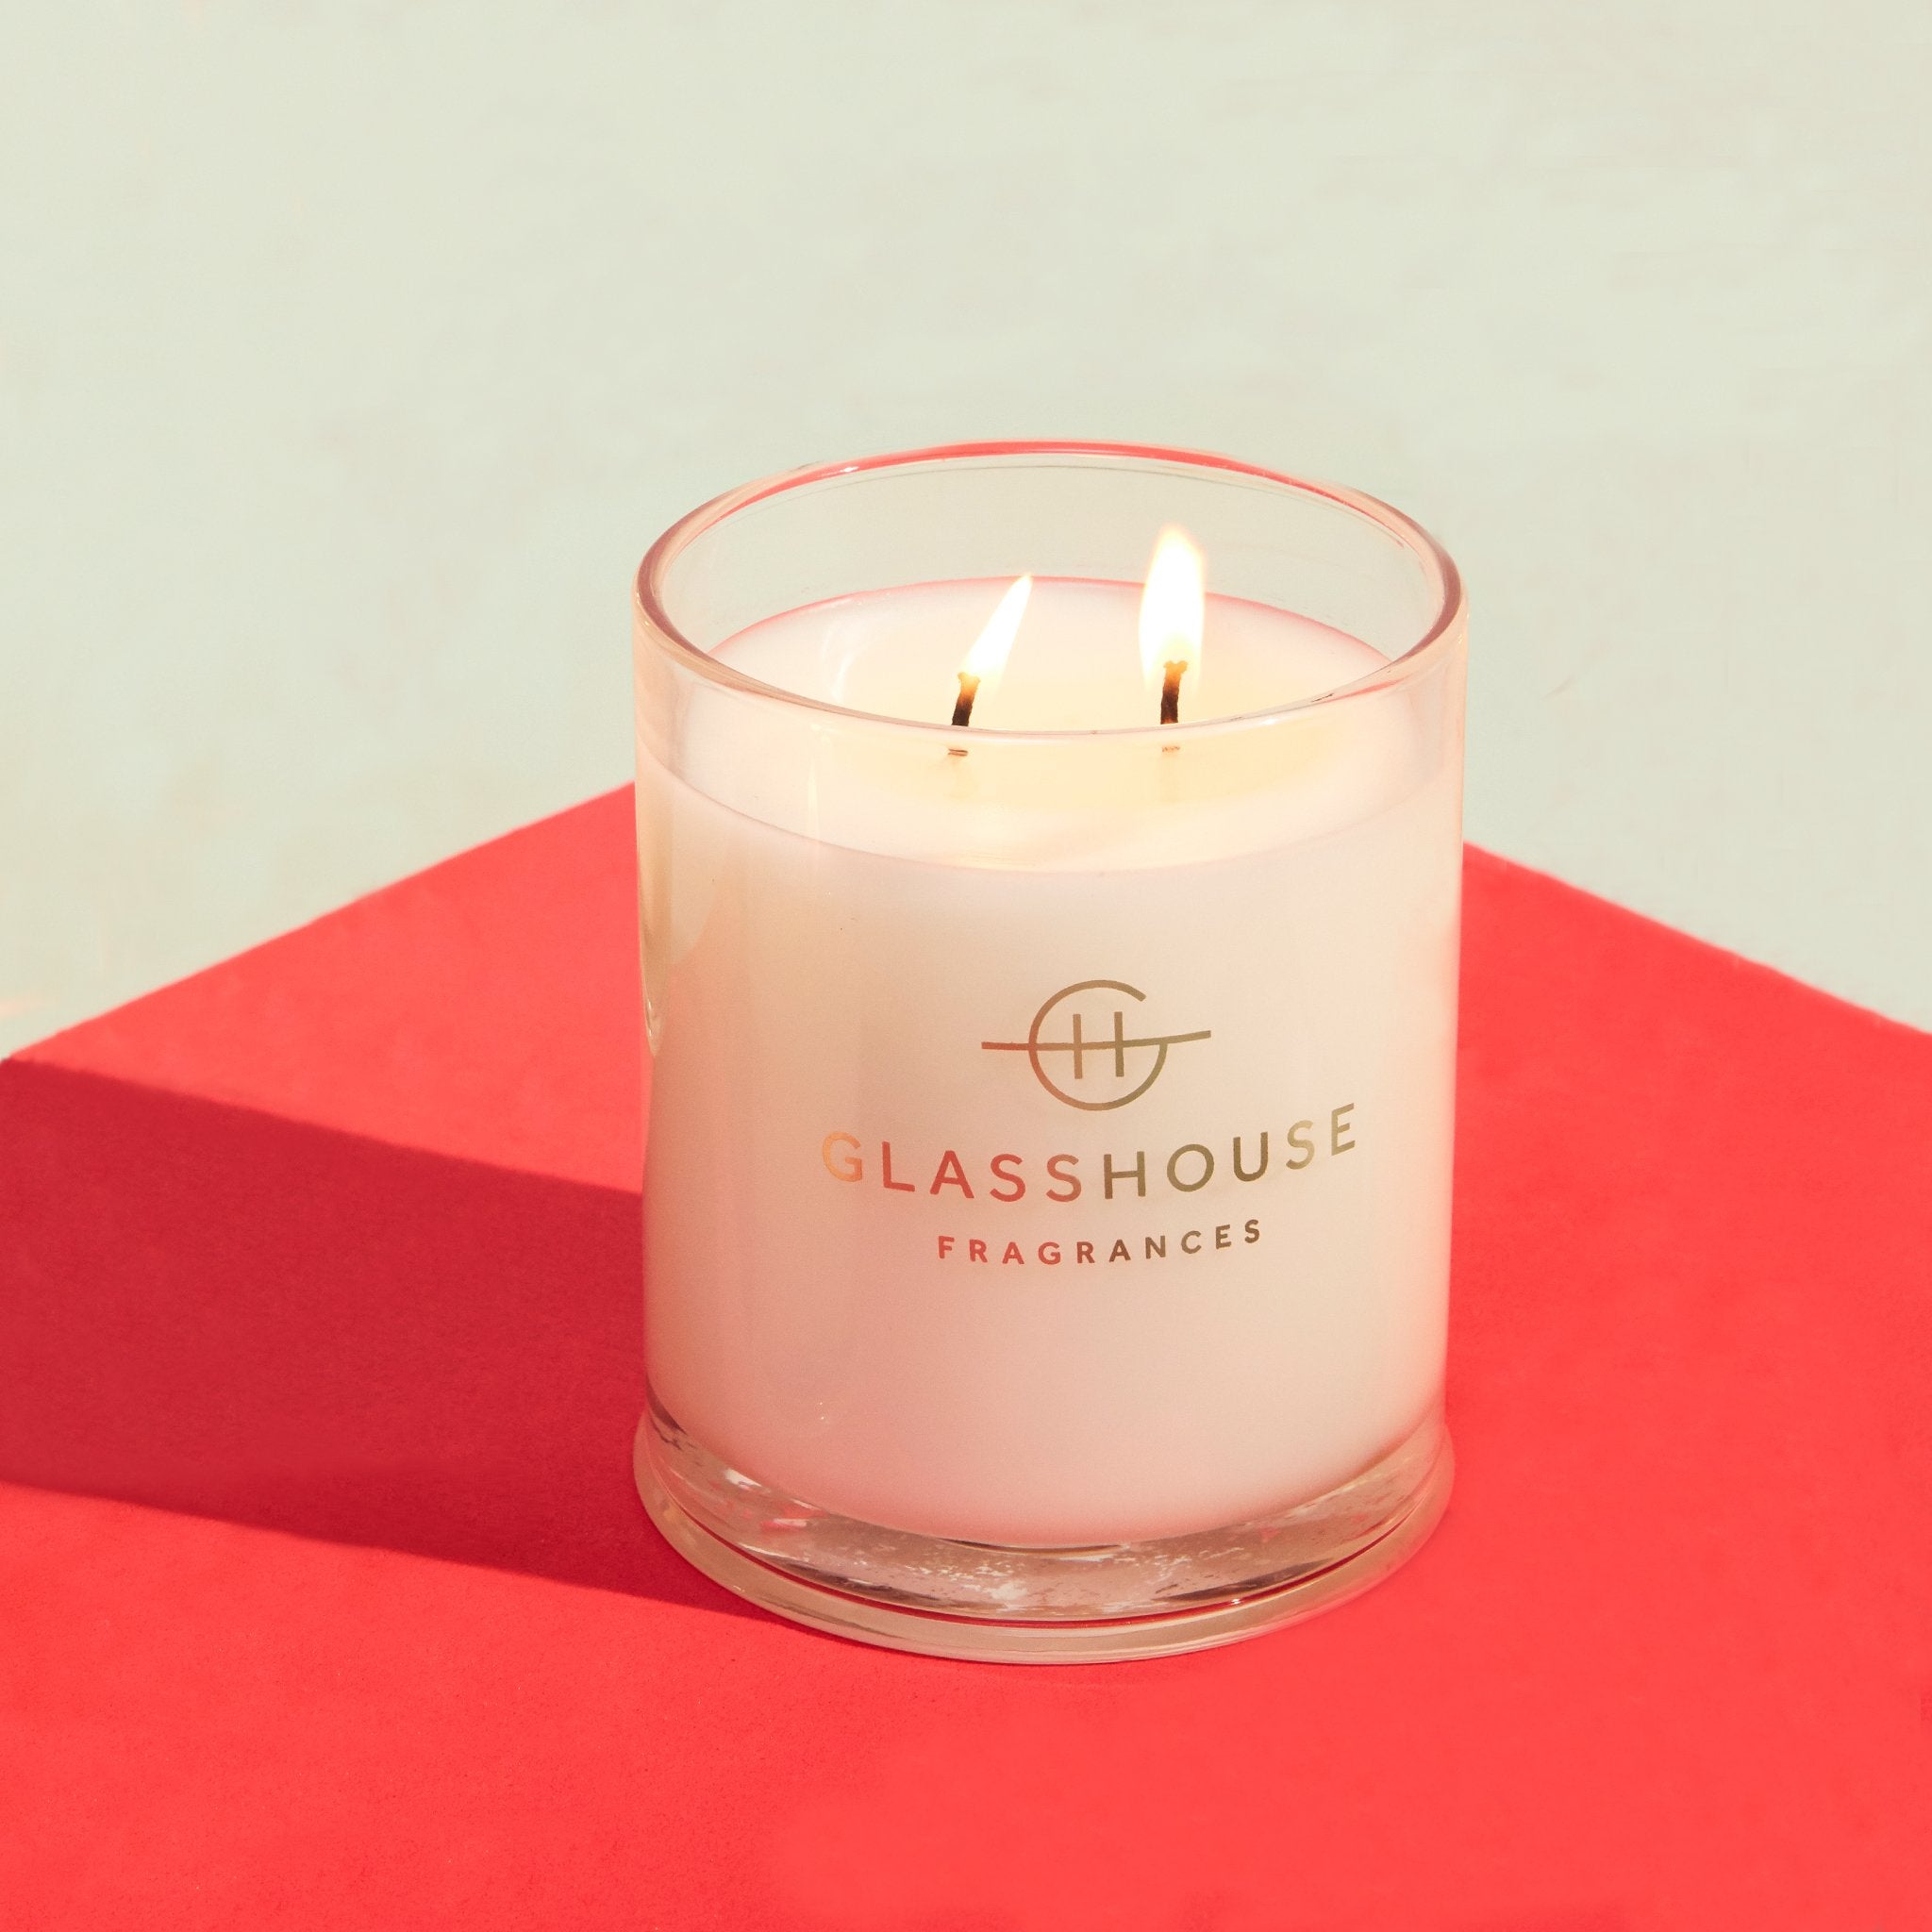 Glasshouse Fragrances Soy Candle burning on red table top